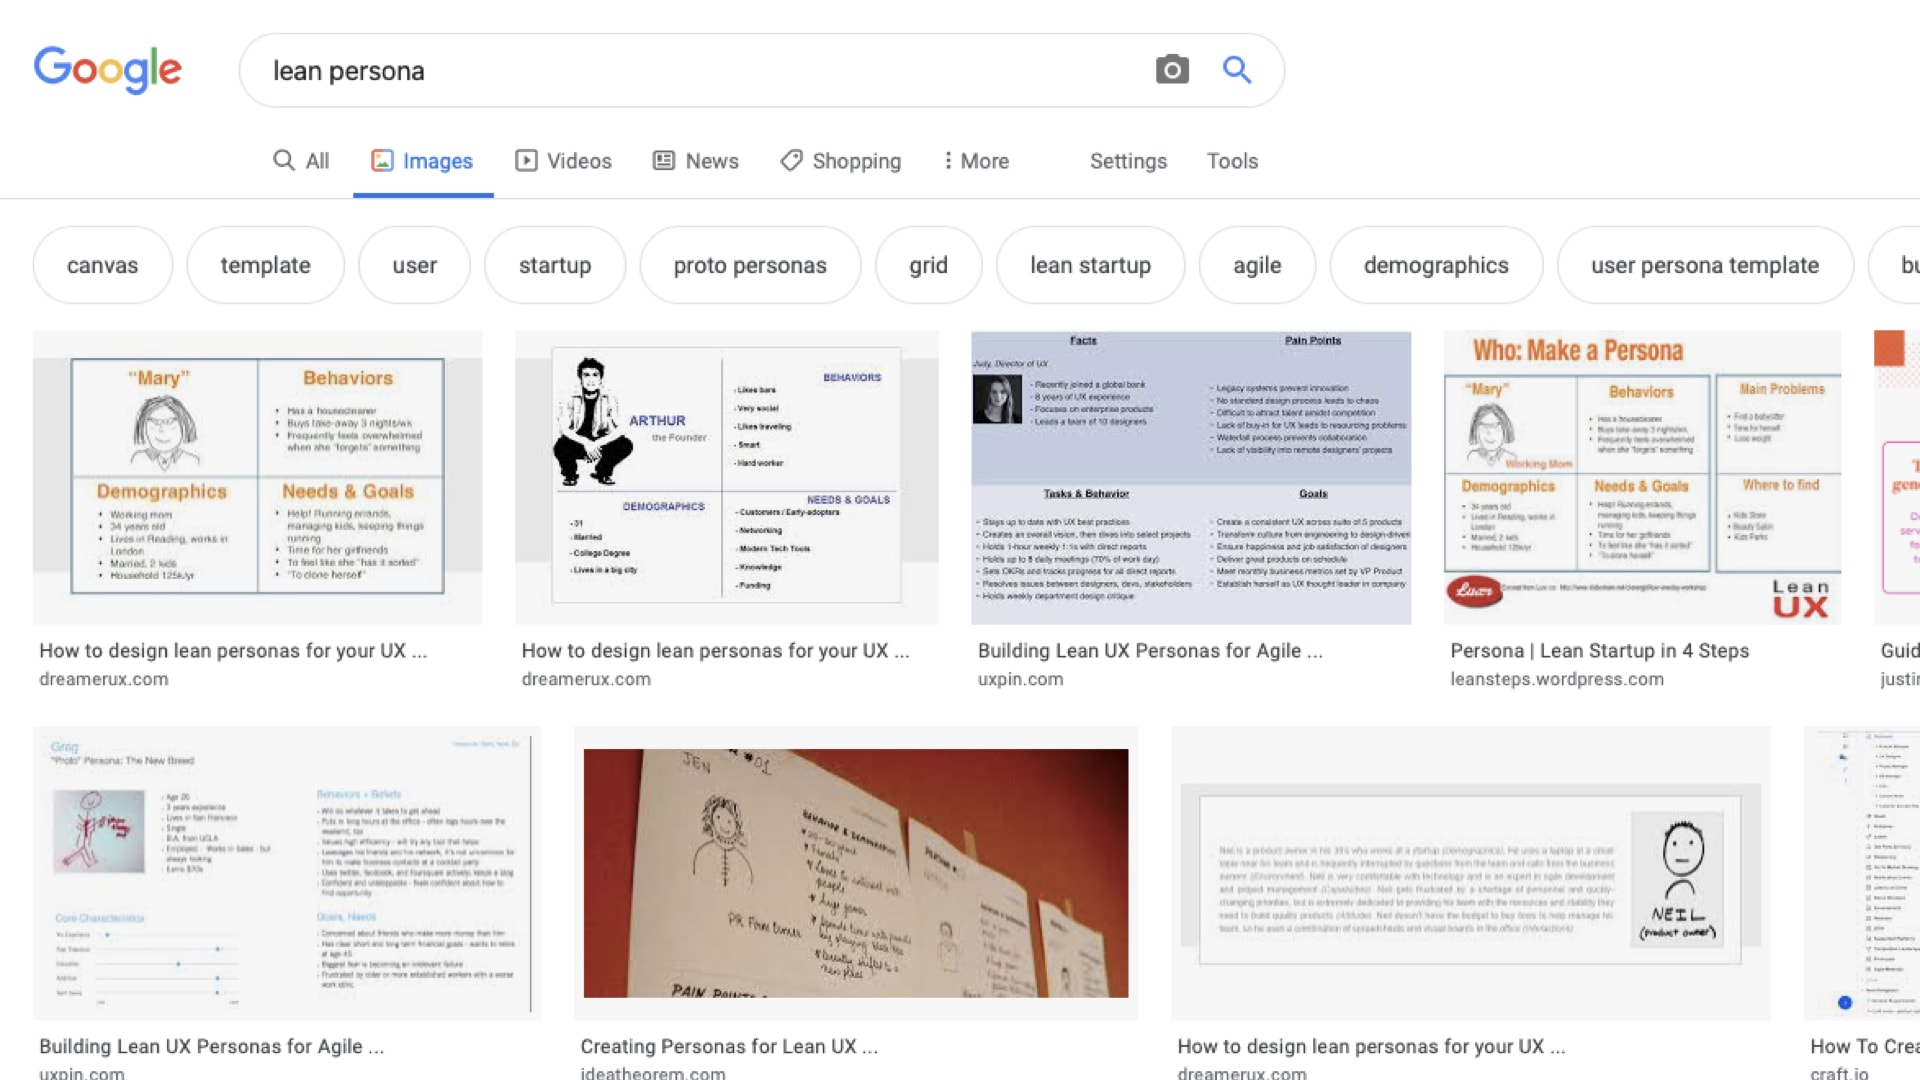 A screen shot of a google image search for 'lean persona' — which returns a lot of four-by-fours.